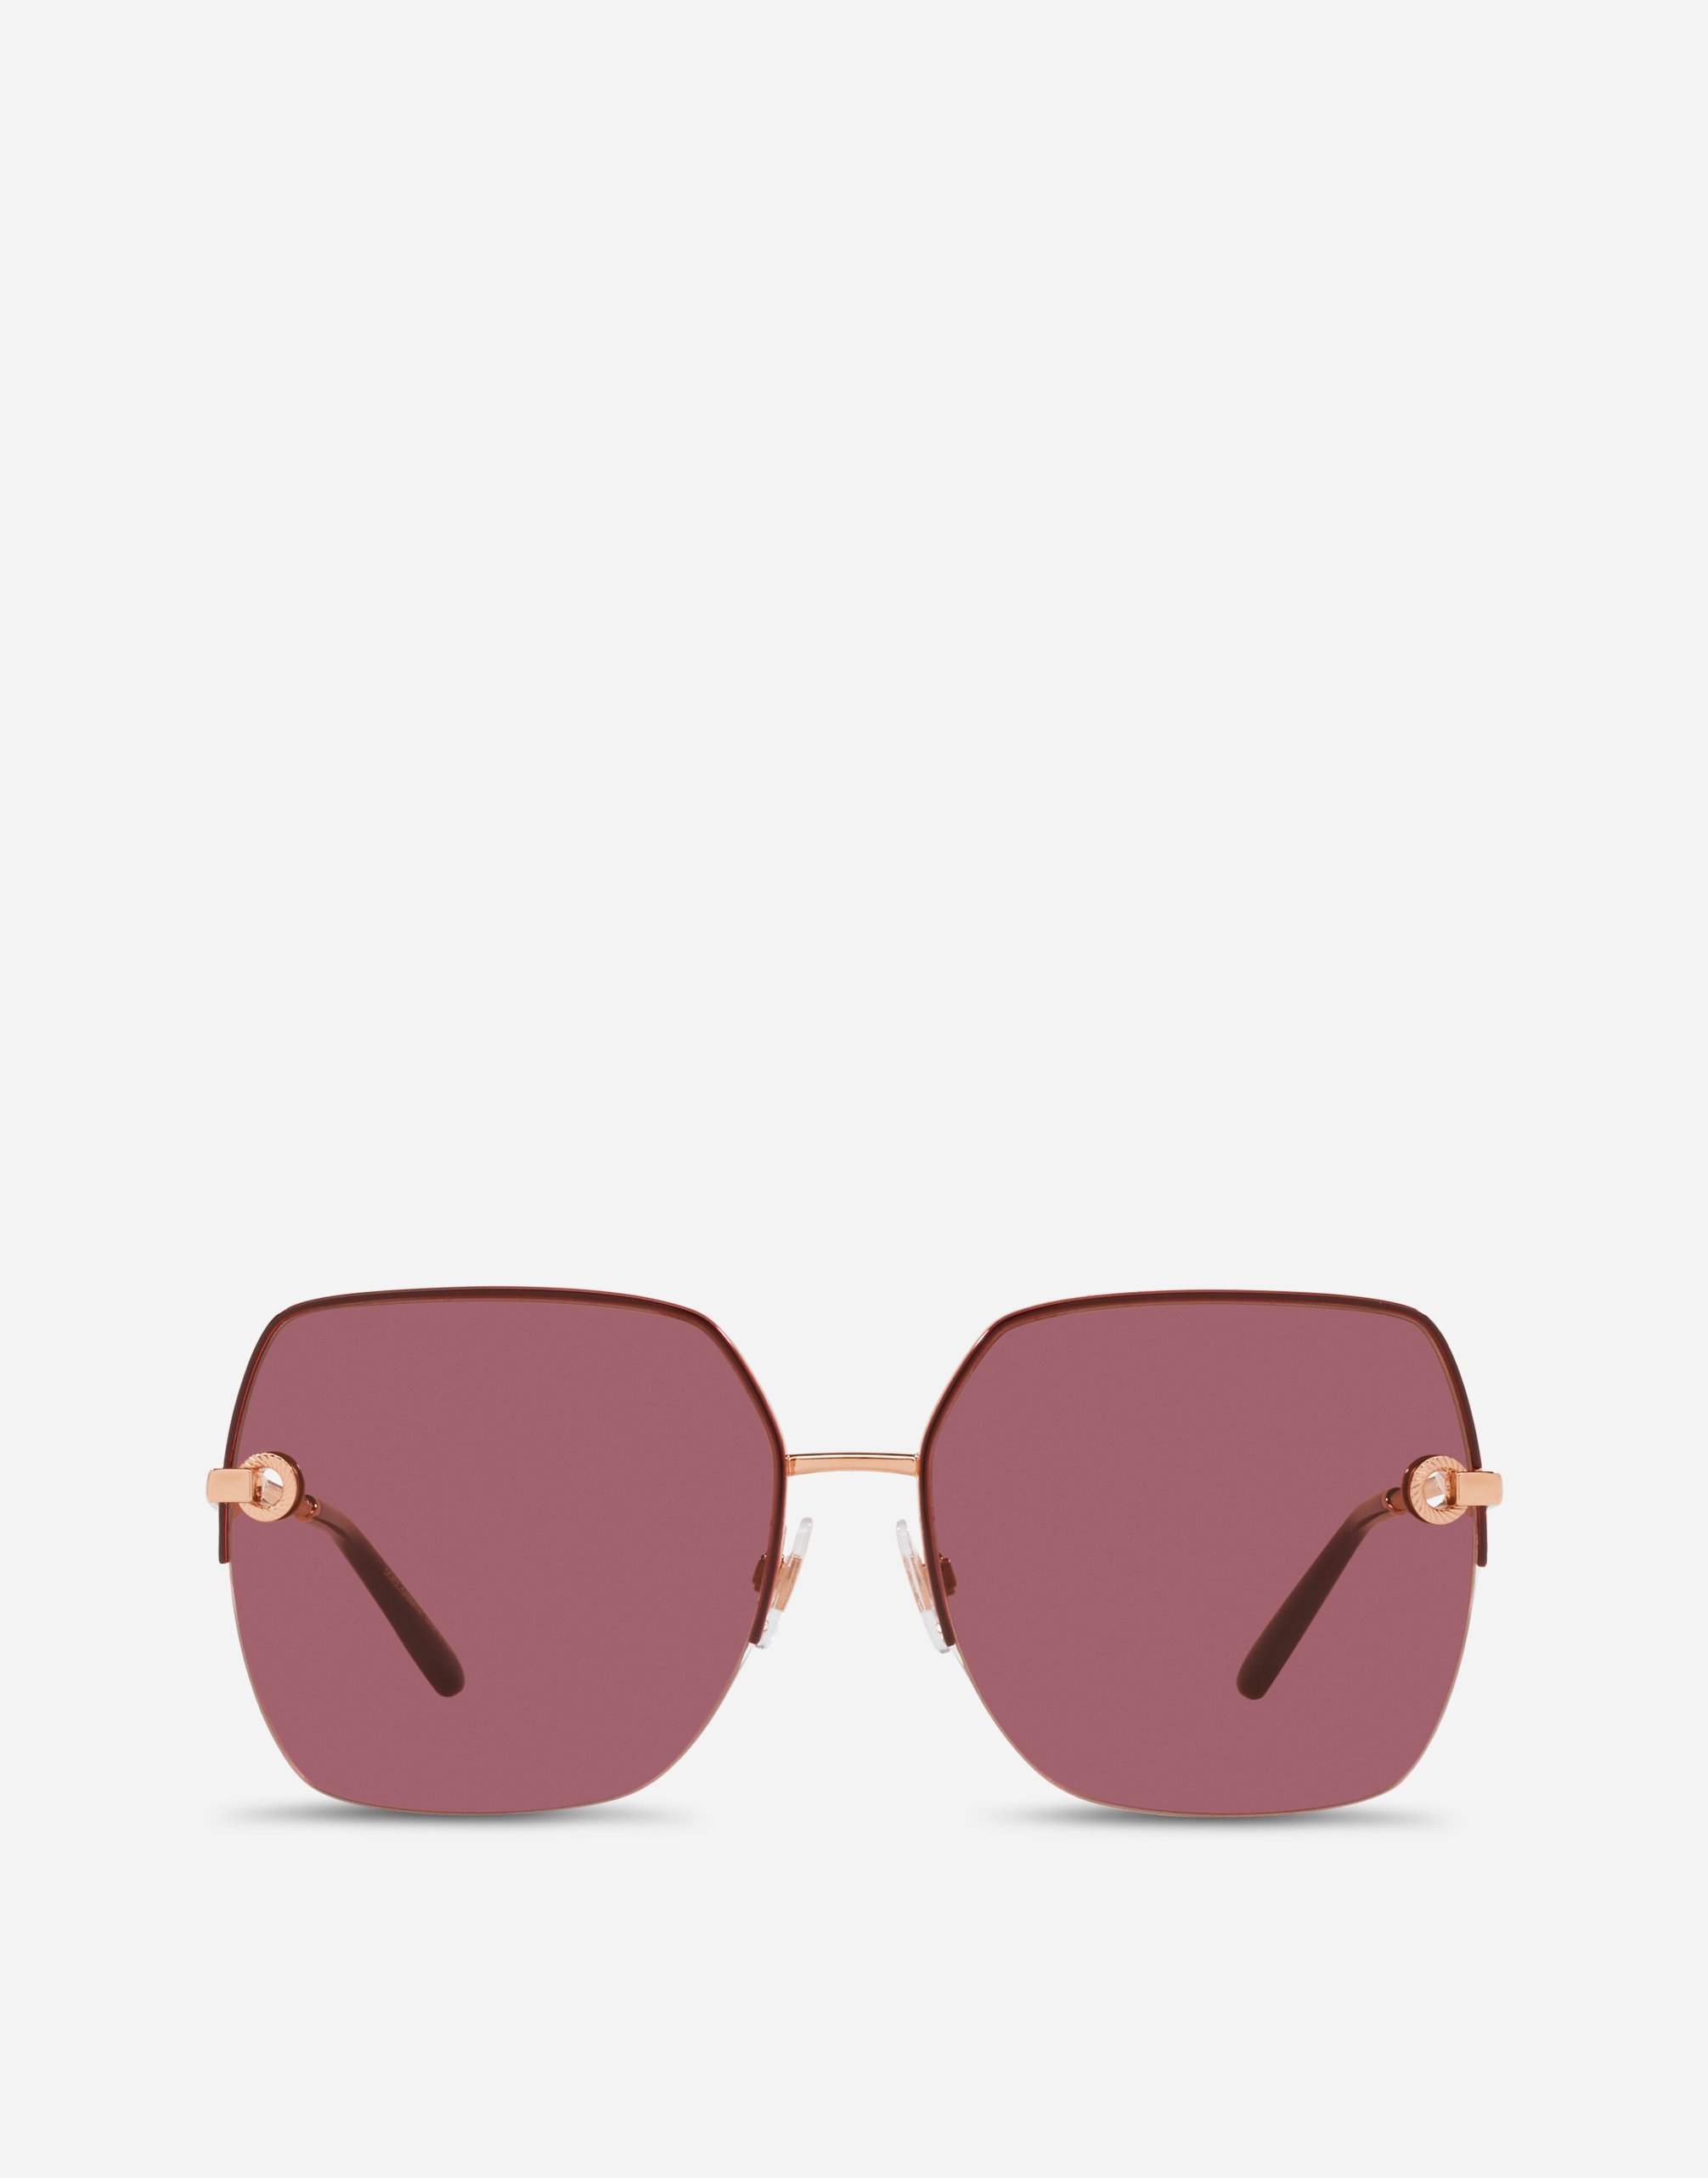 DG Amore sunglasses in Pink Gold